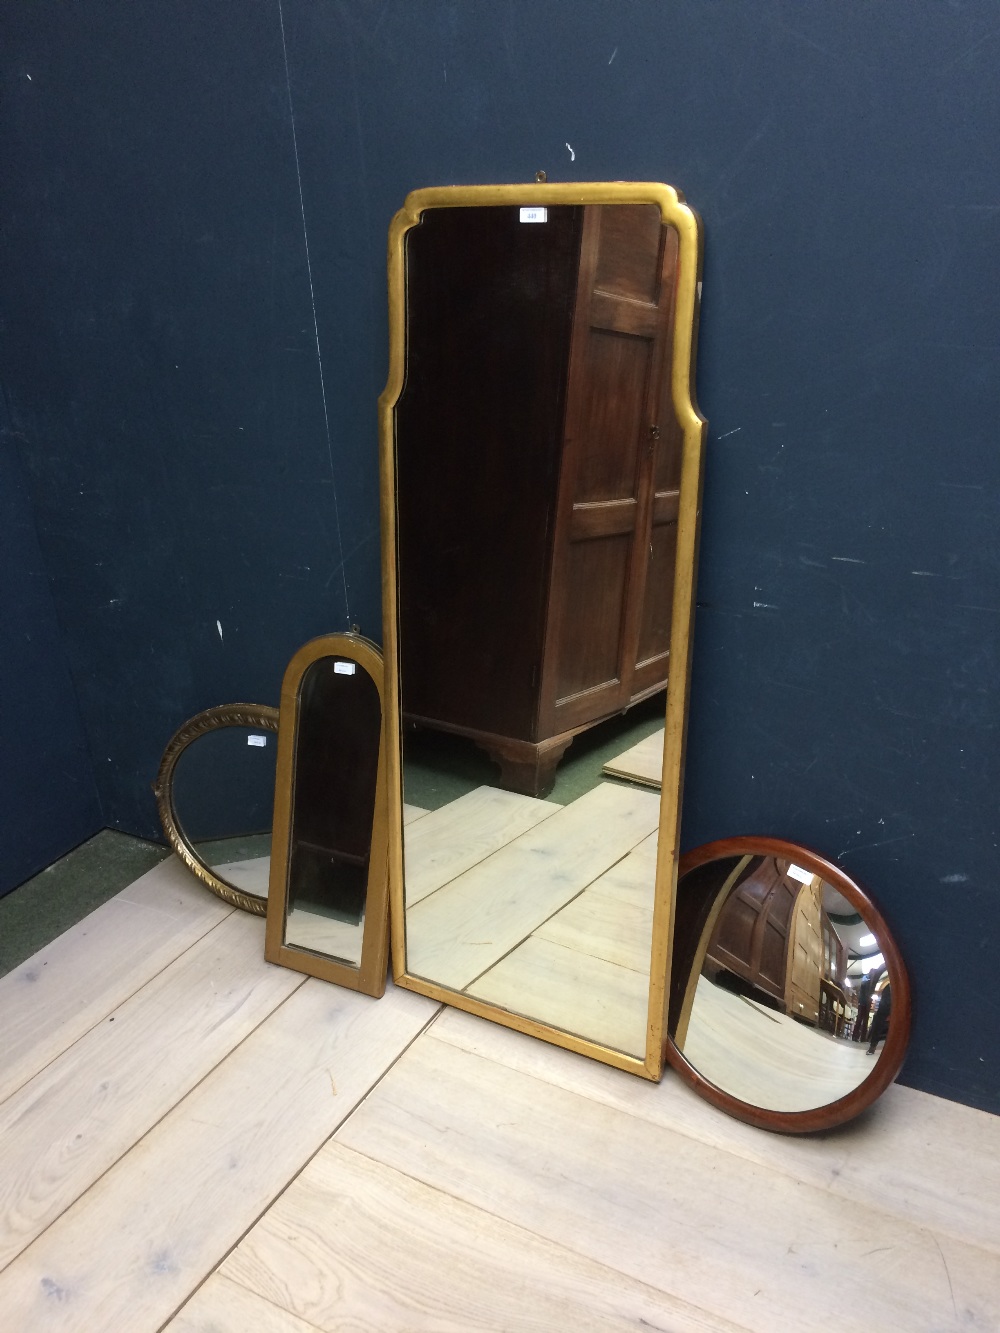 3 gilt mirrors and 1 convex mirror in mahogany frame